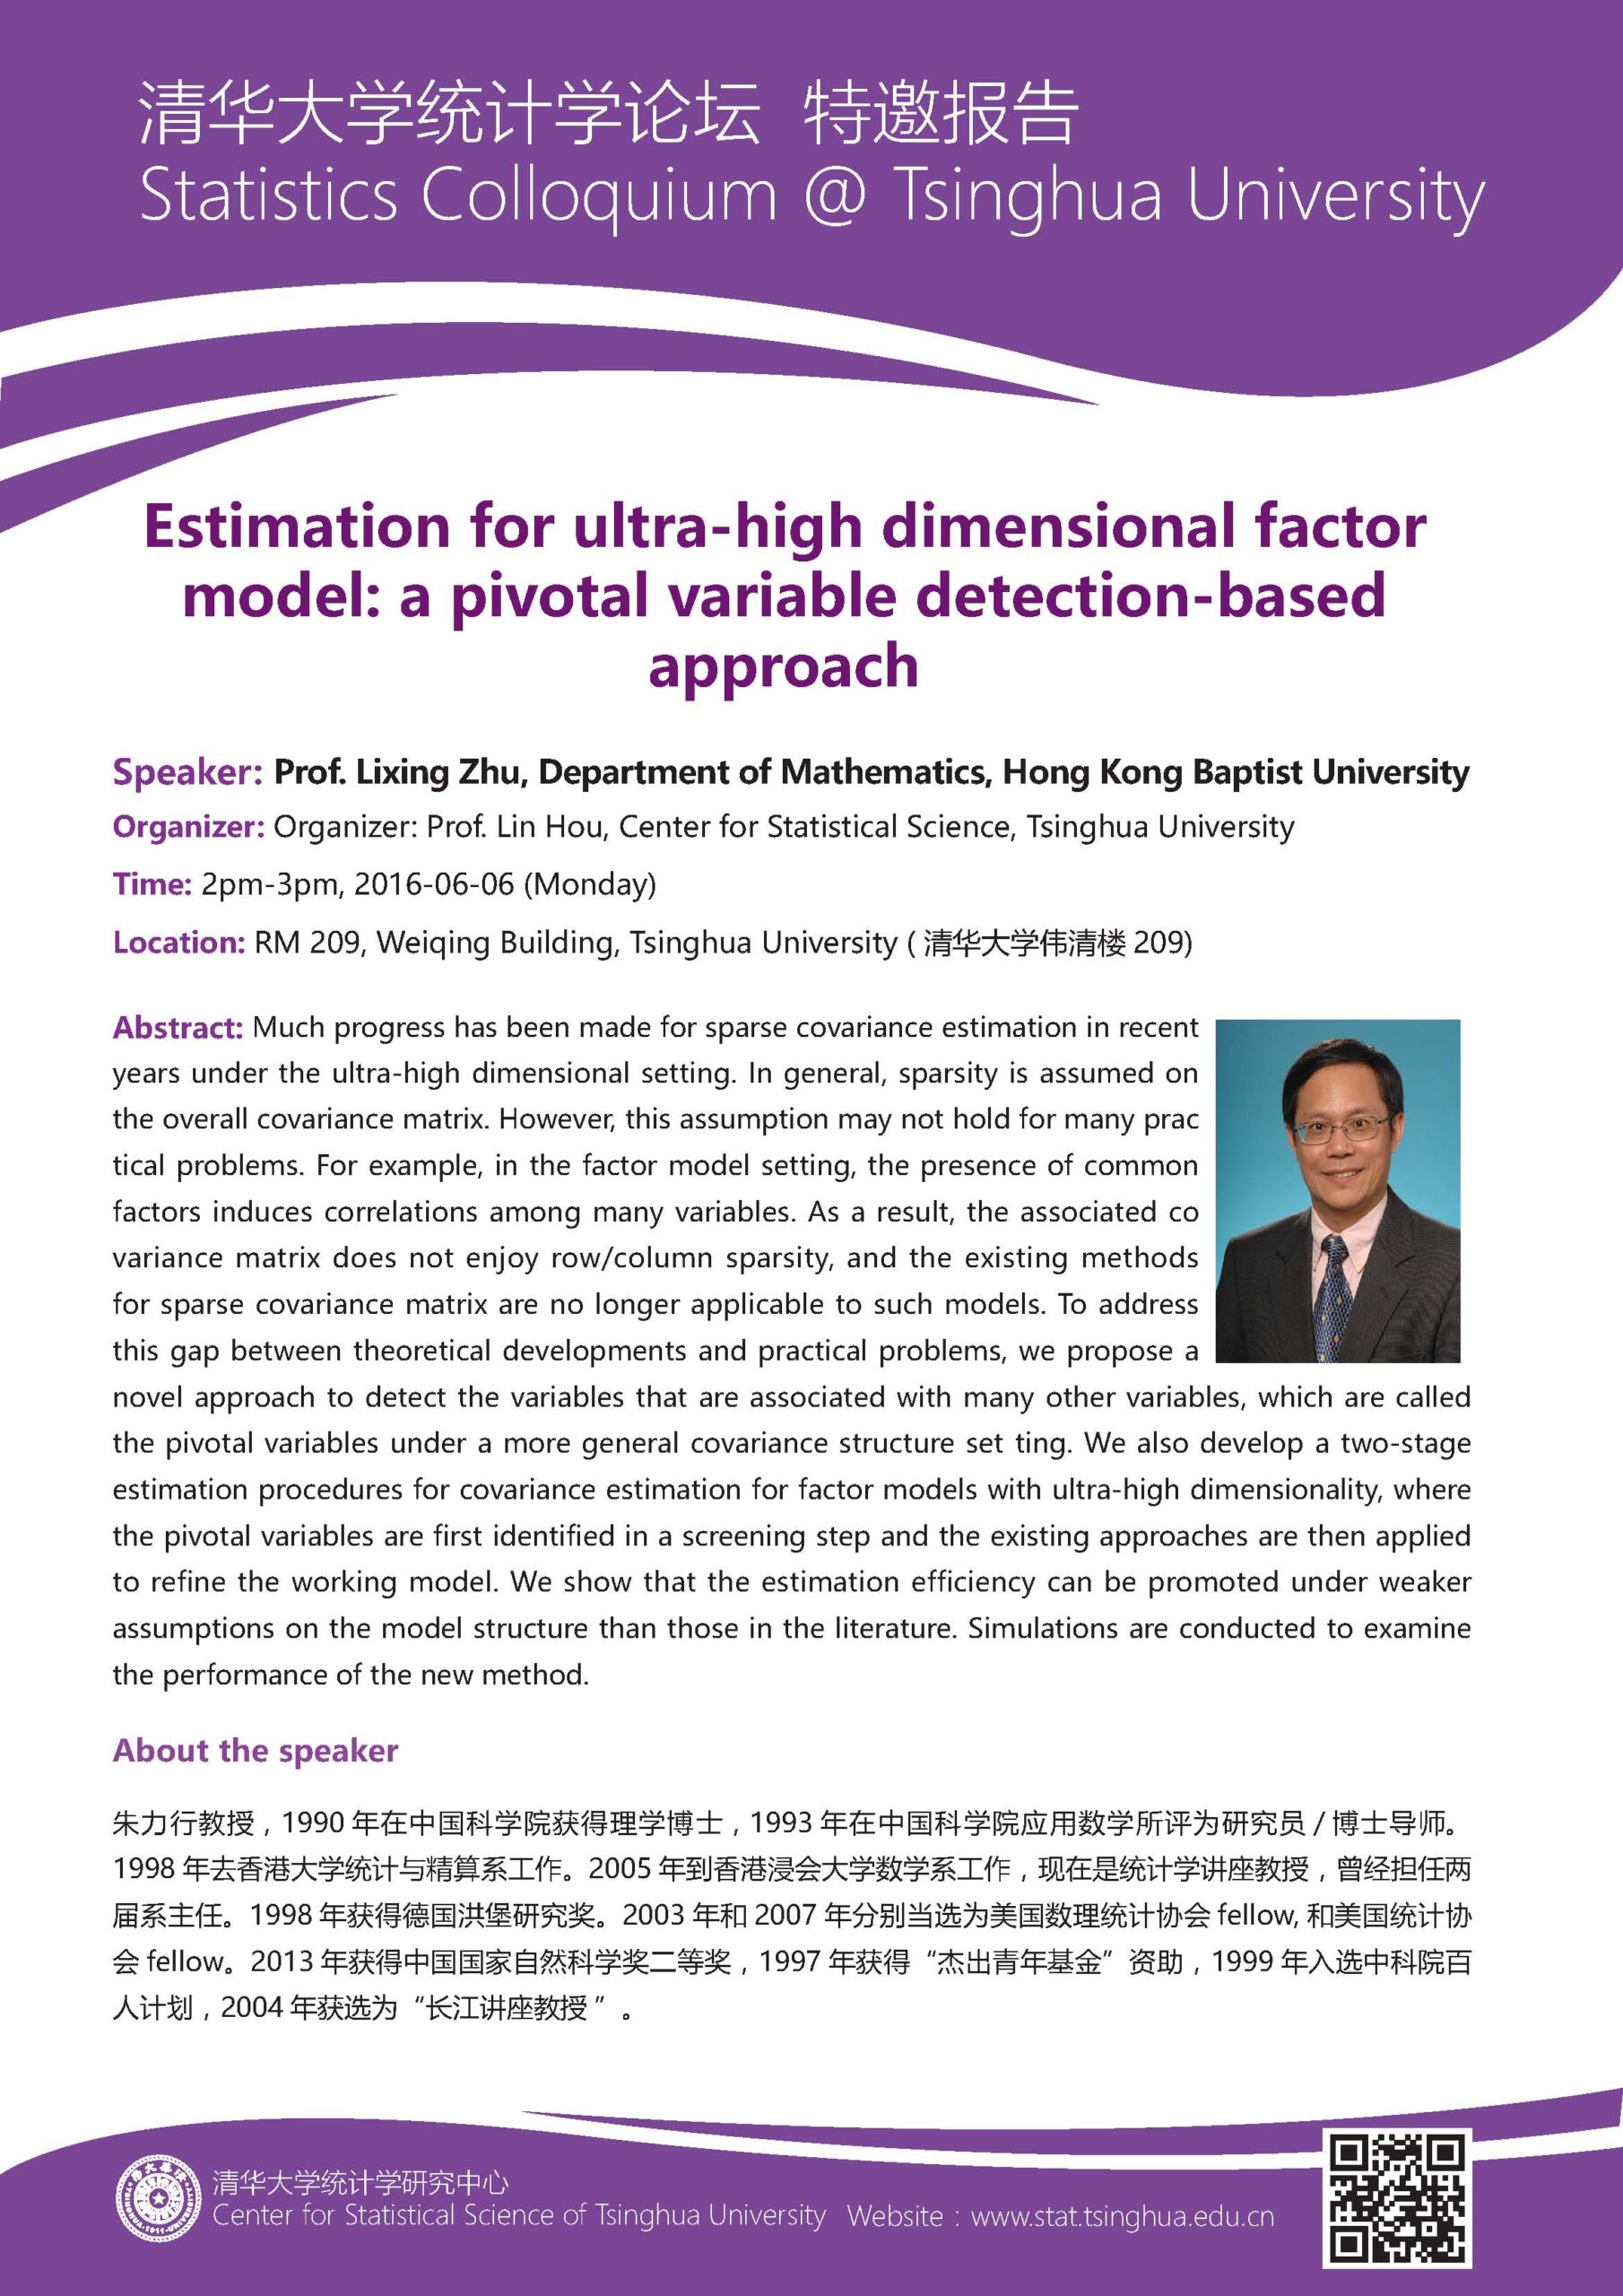 Estimation for Ultra-high Dimensional Factor Model: a Pivotal Variable Detection-based Approach